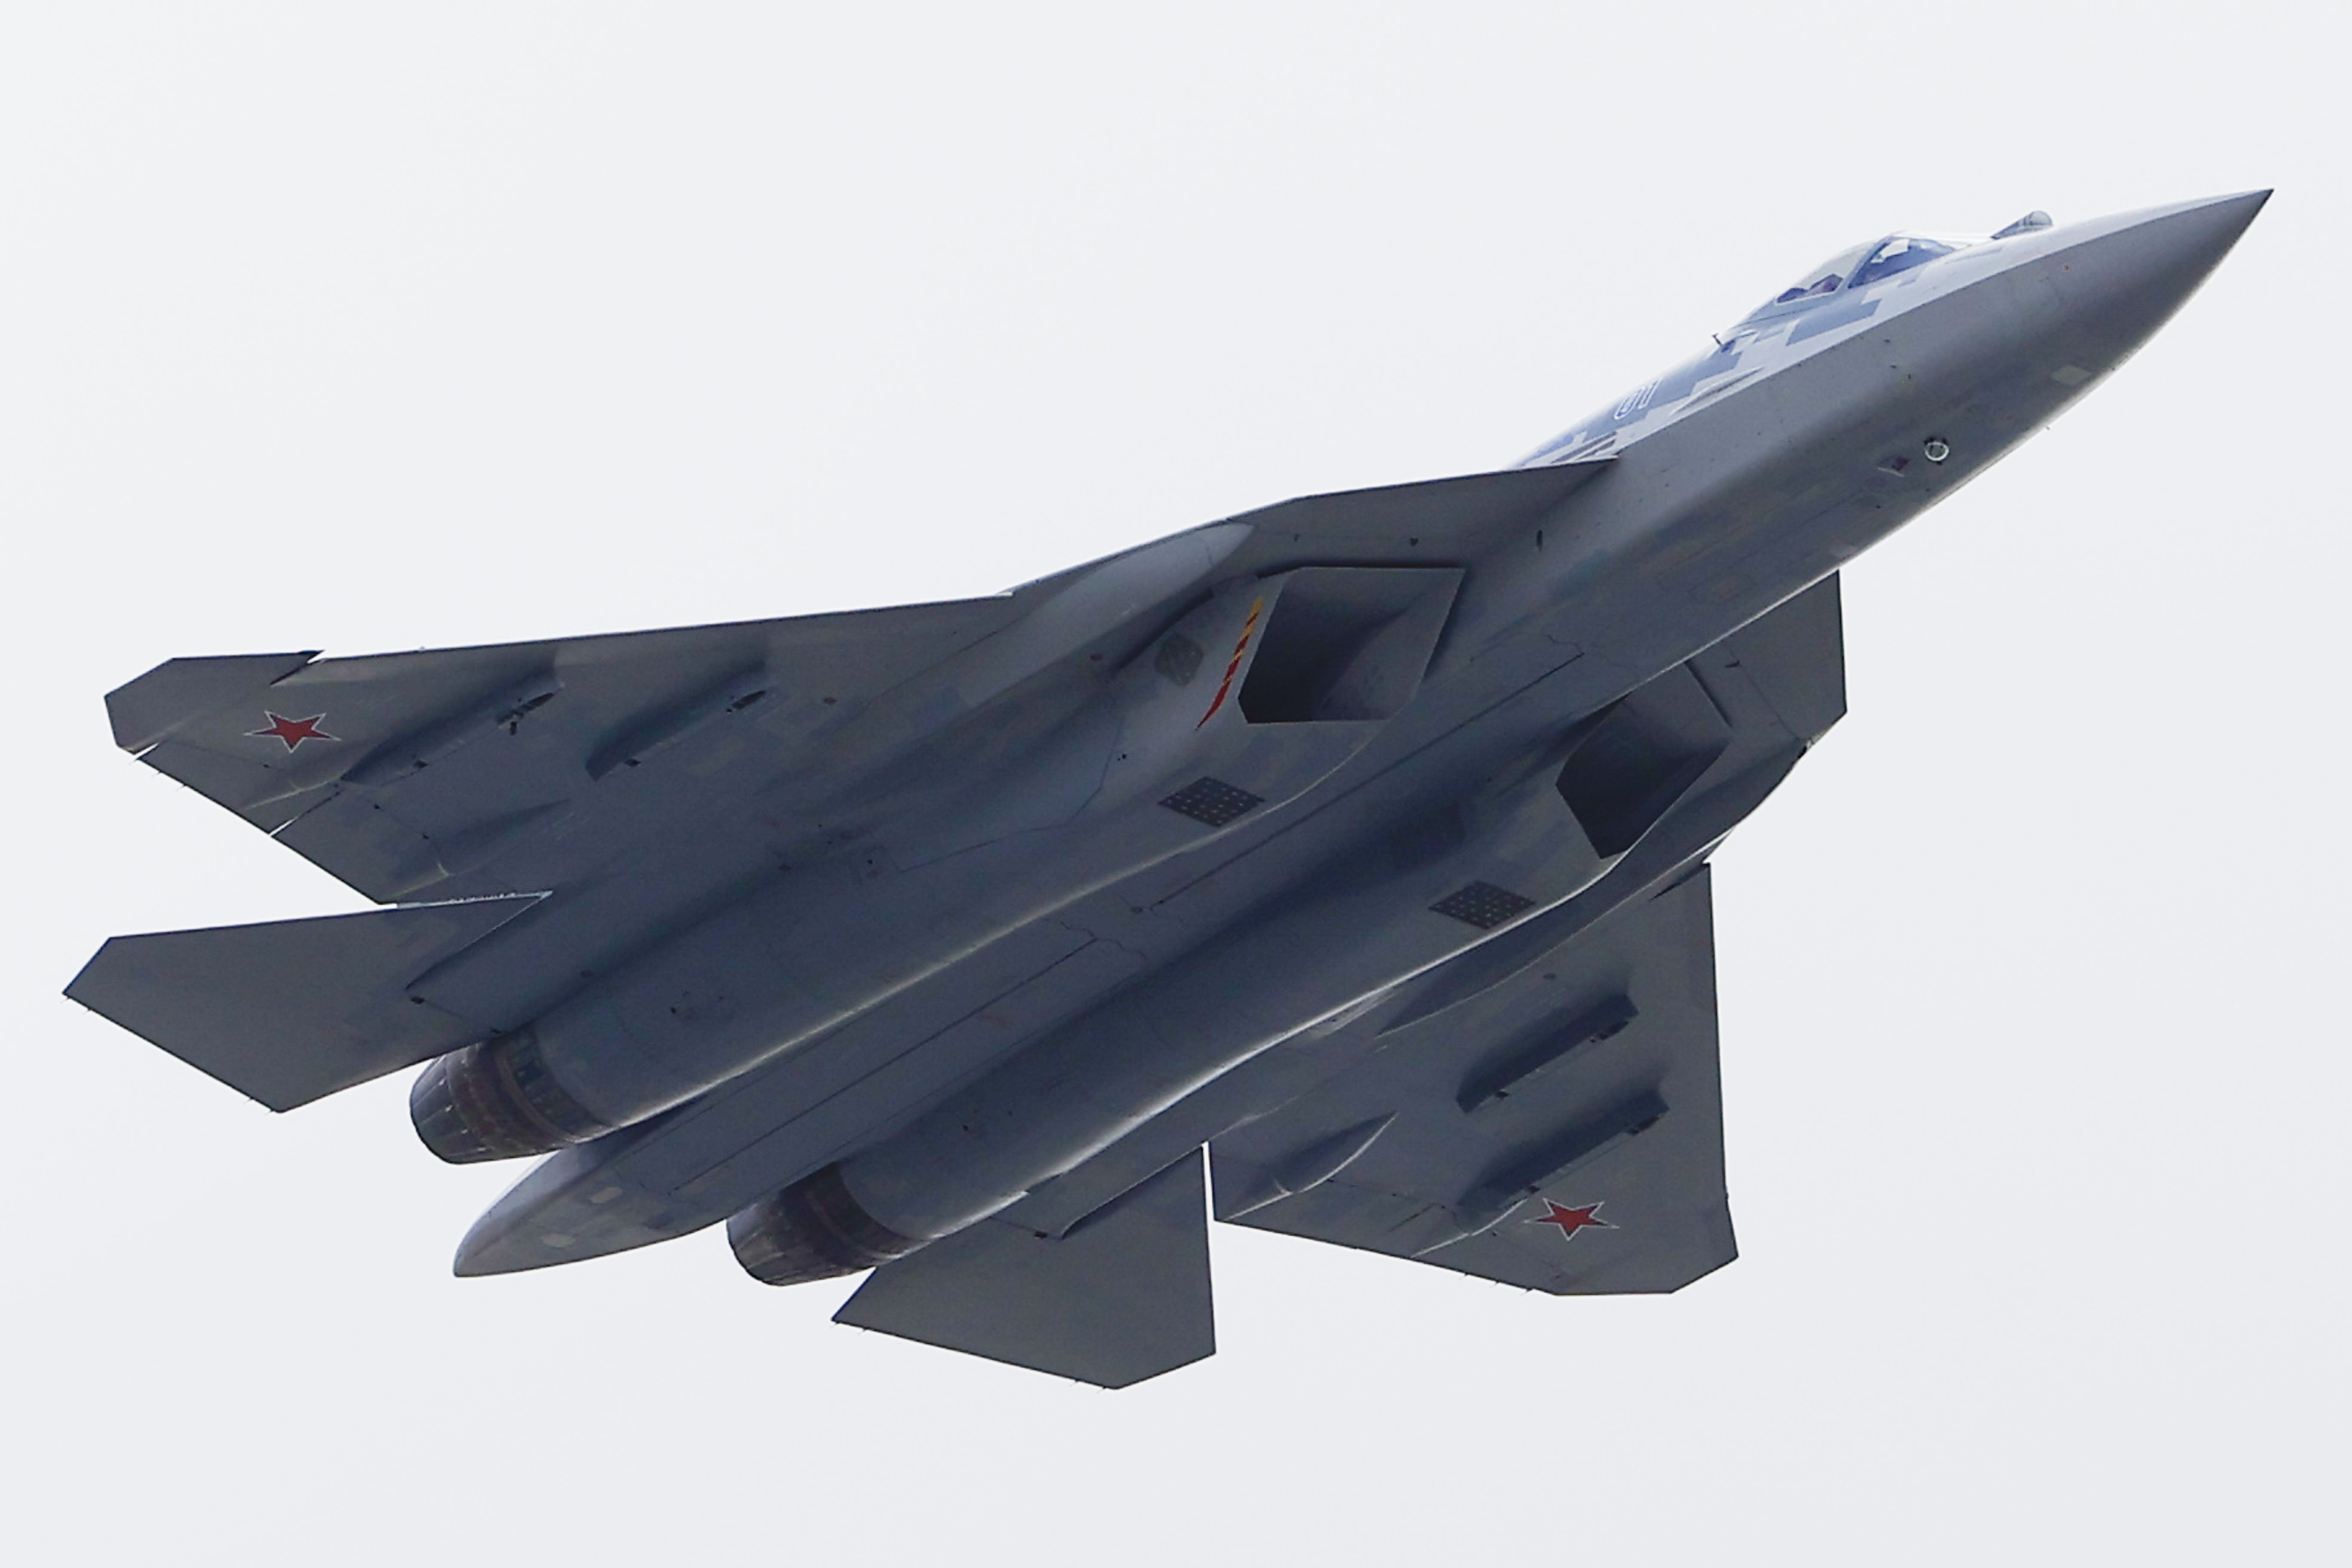 Russia's New Stealth Fighter